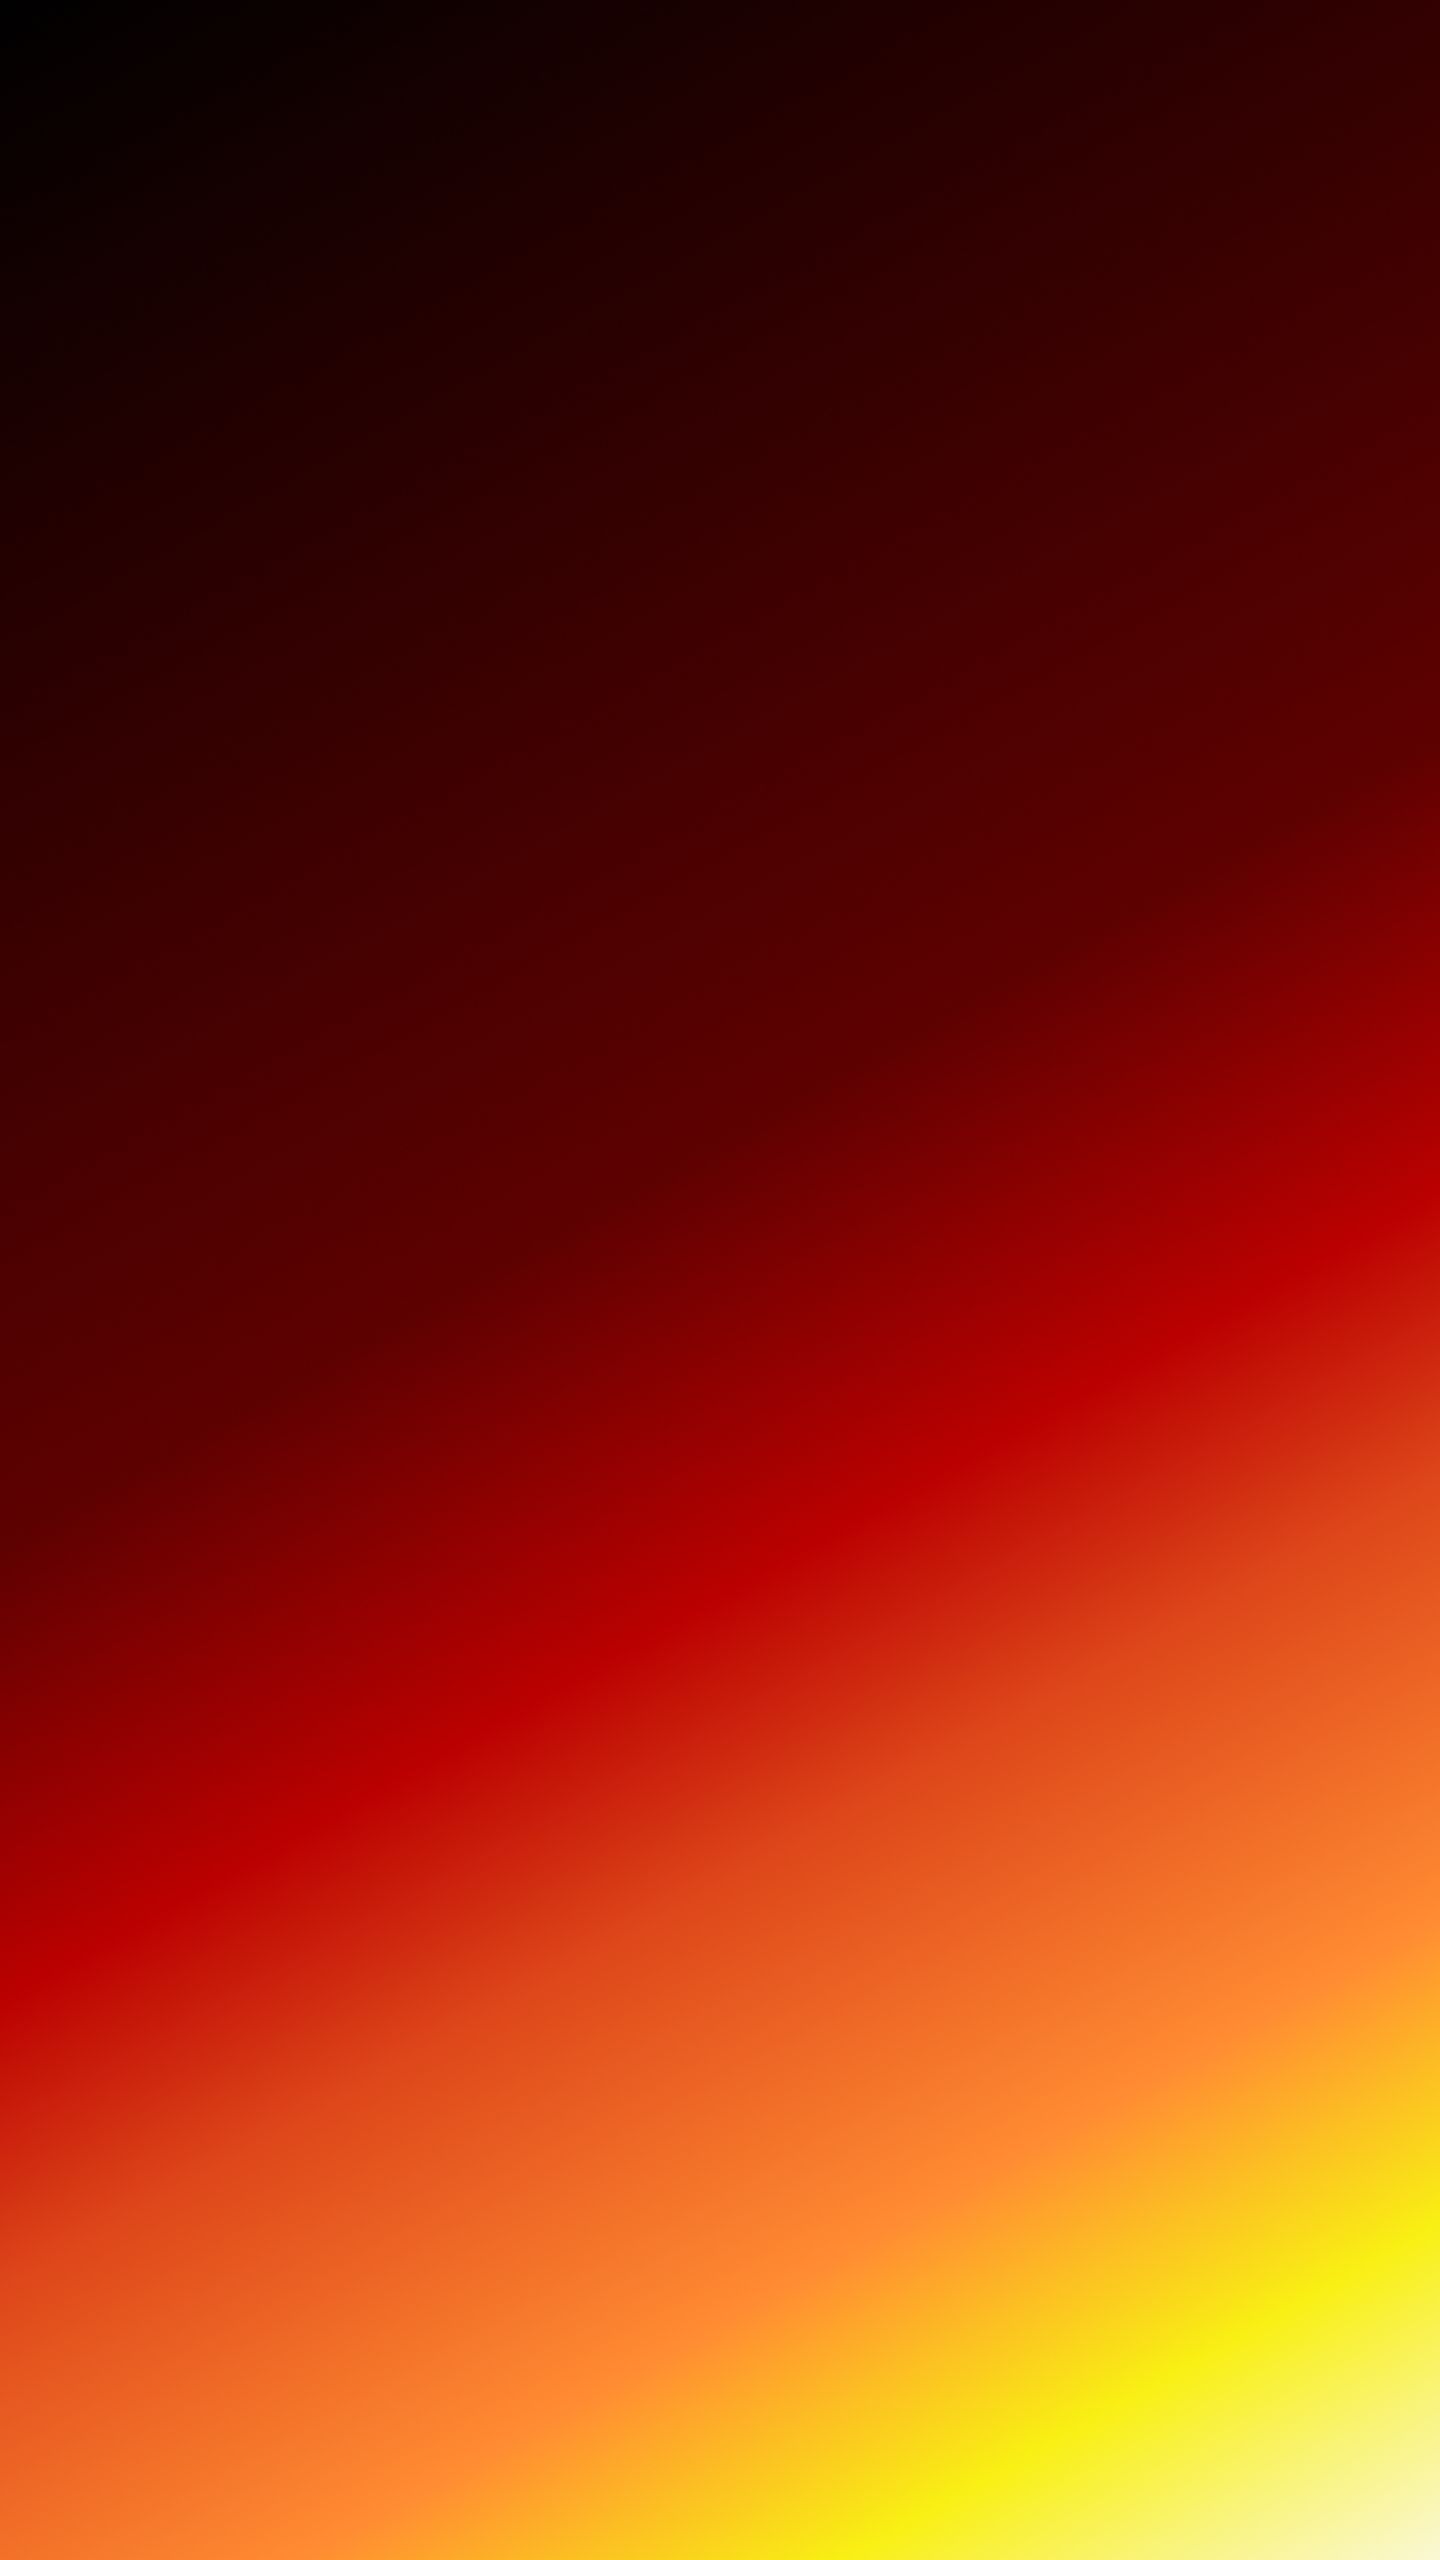 Red and yellow iPhone X wallpaper.j